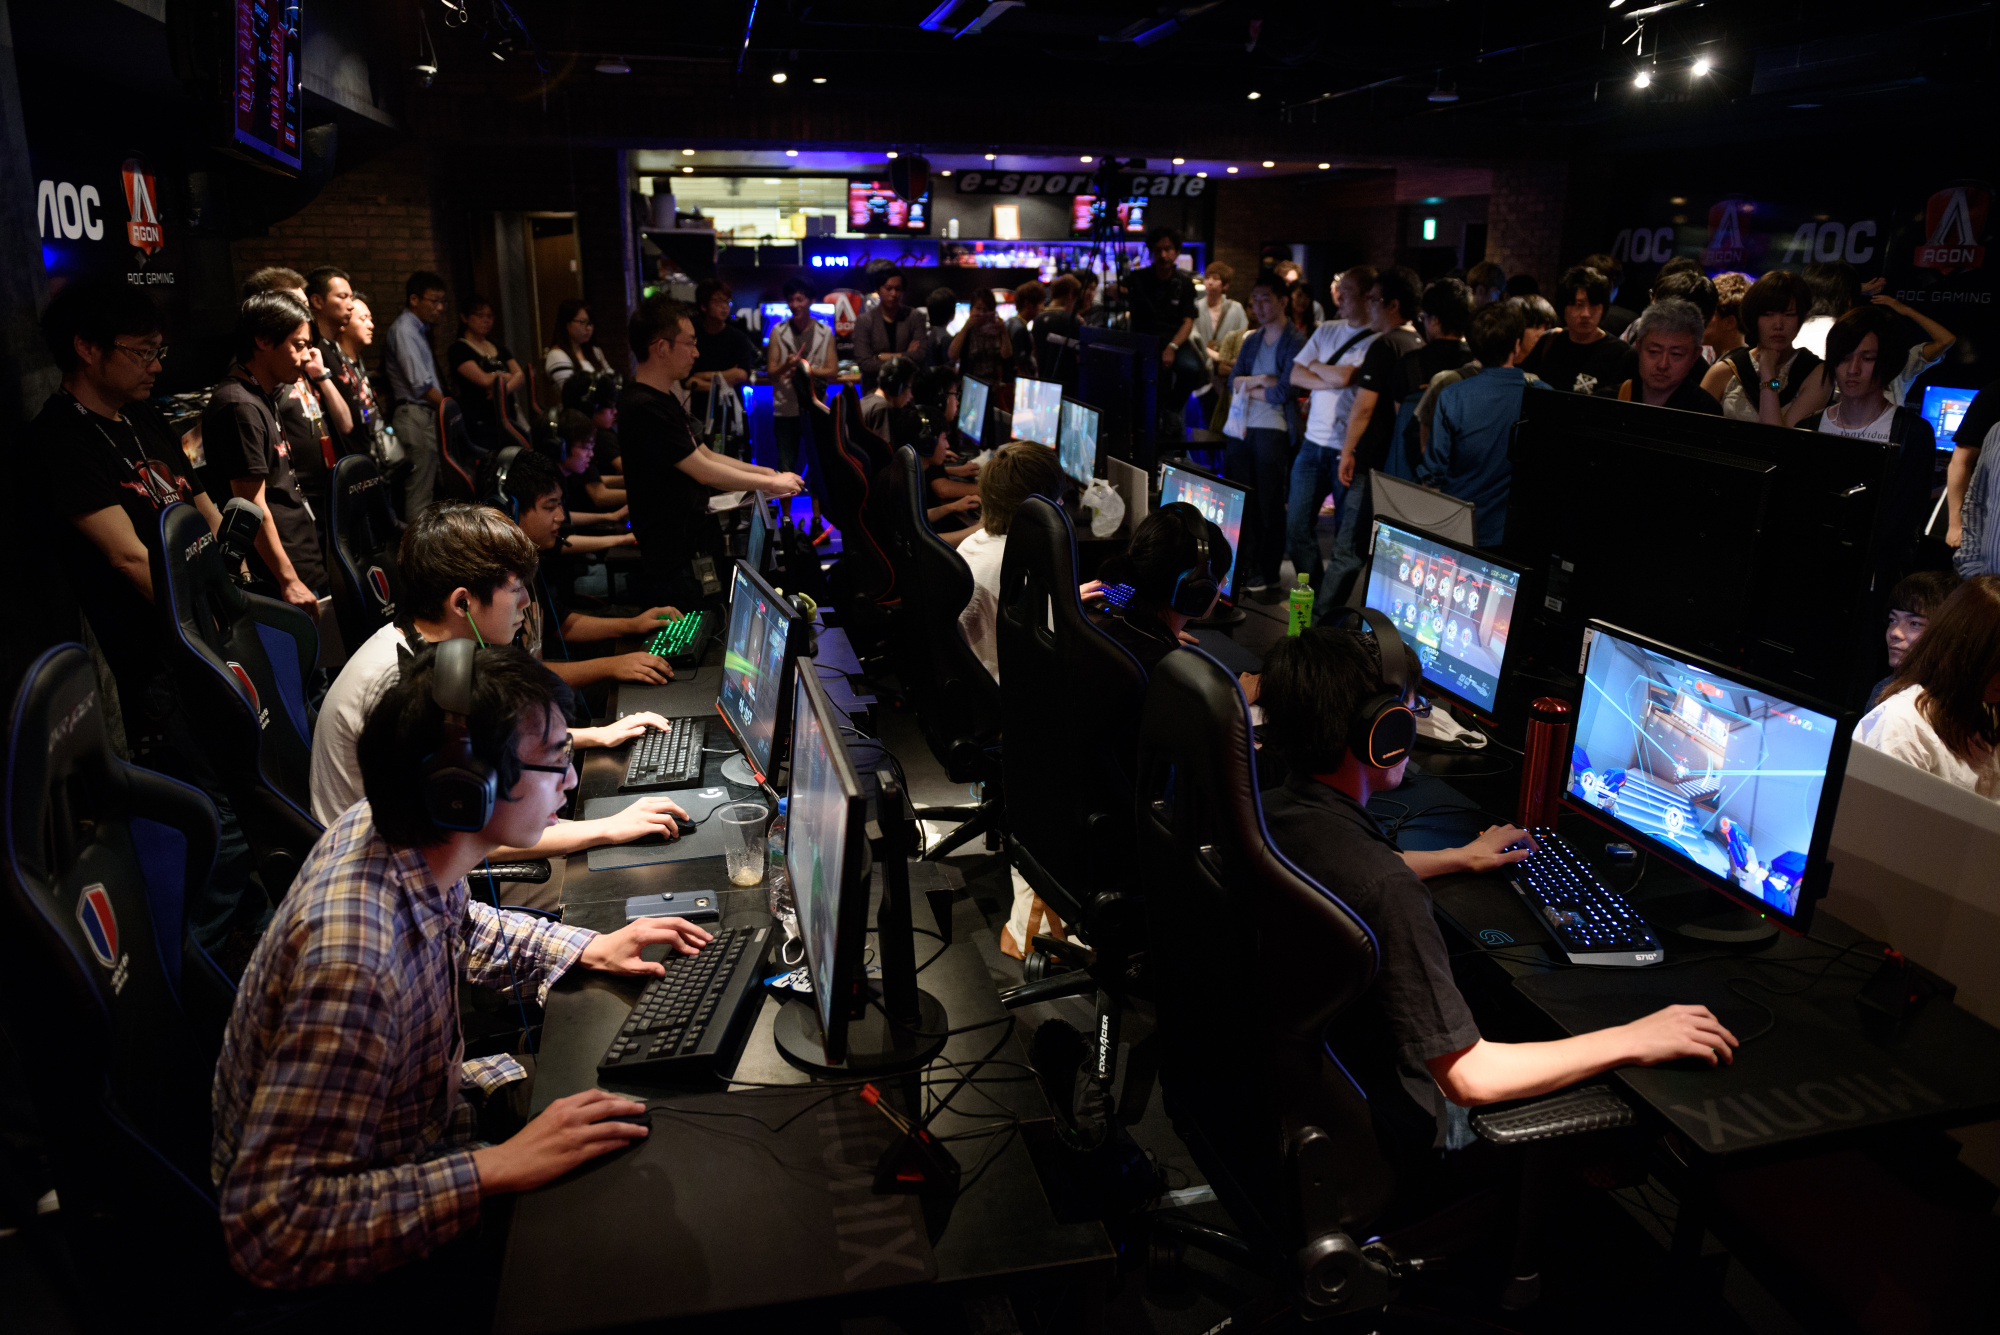 AOC Open Video Game Event As Japan’s Strict Anti-gambling Laws Limit eSports